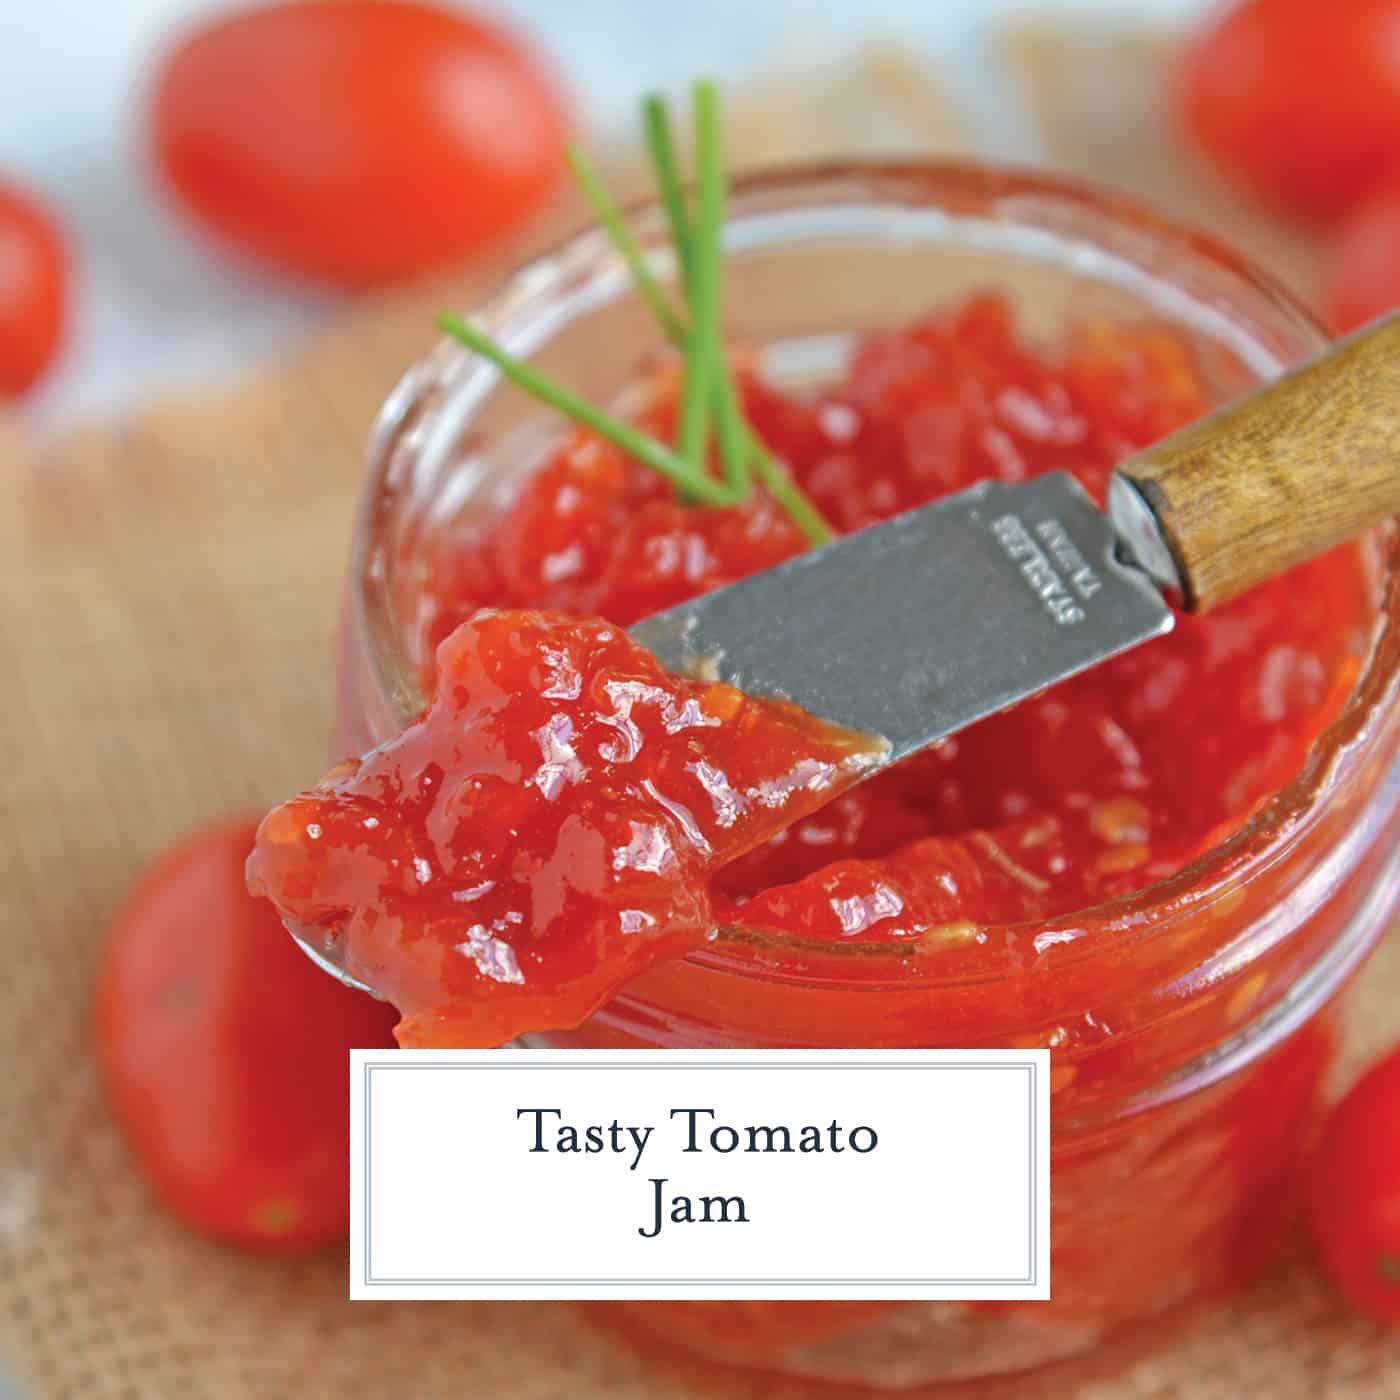 Tangy and sweet, tomato jam is excellent on everything from grilled cheese to deviled eggs, hamburgers and charcuterie boards. #tomatojam #homemadejamrecipe www.savoryexperiments.com